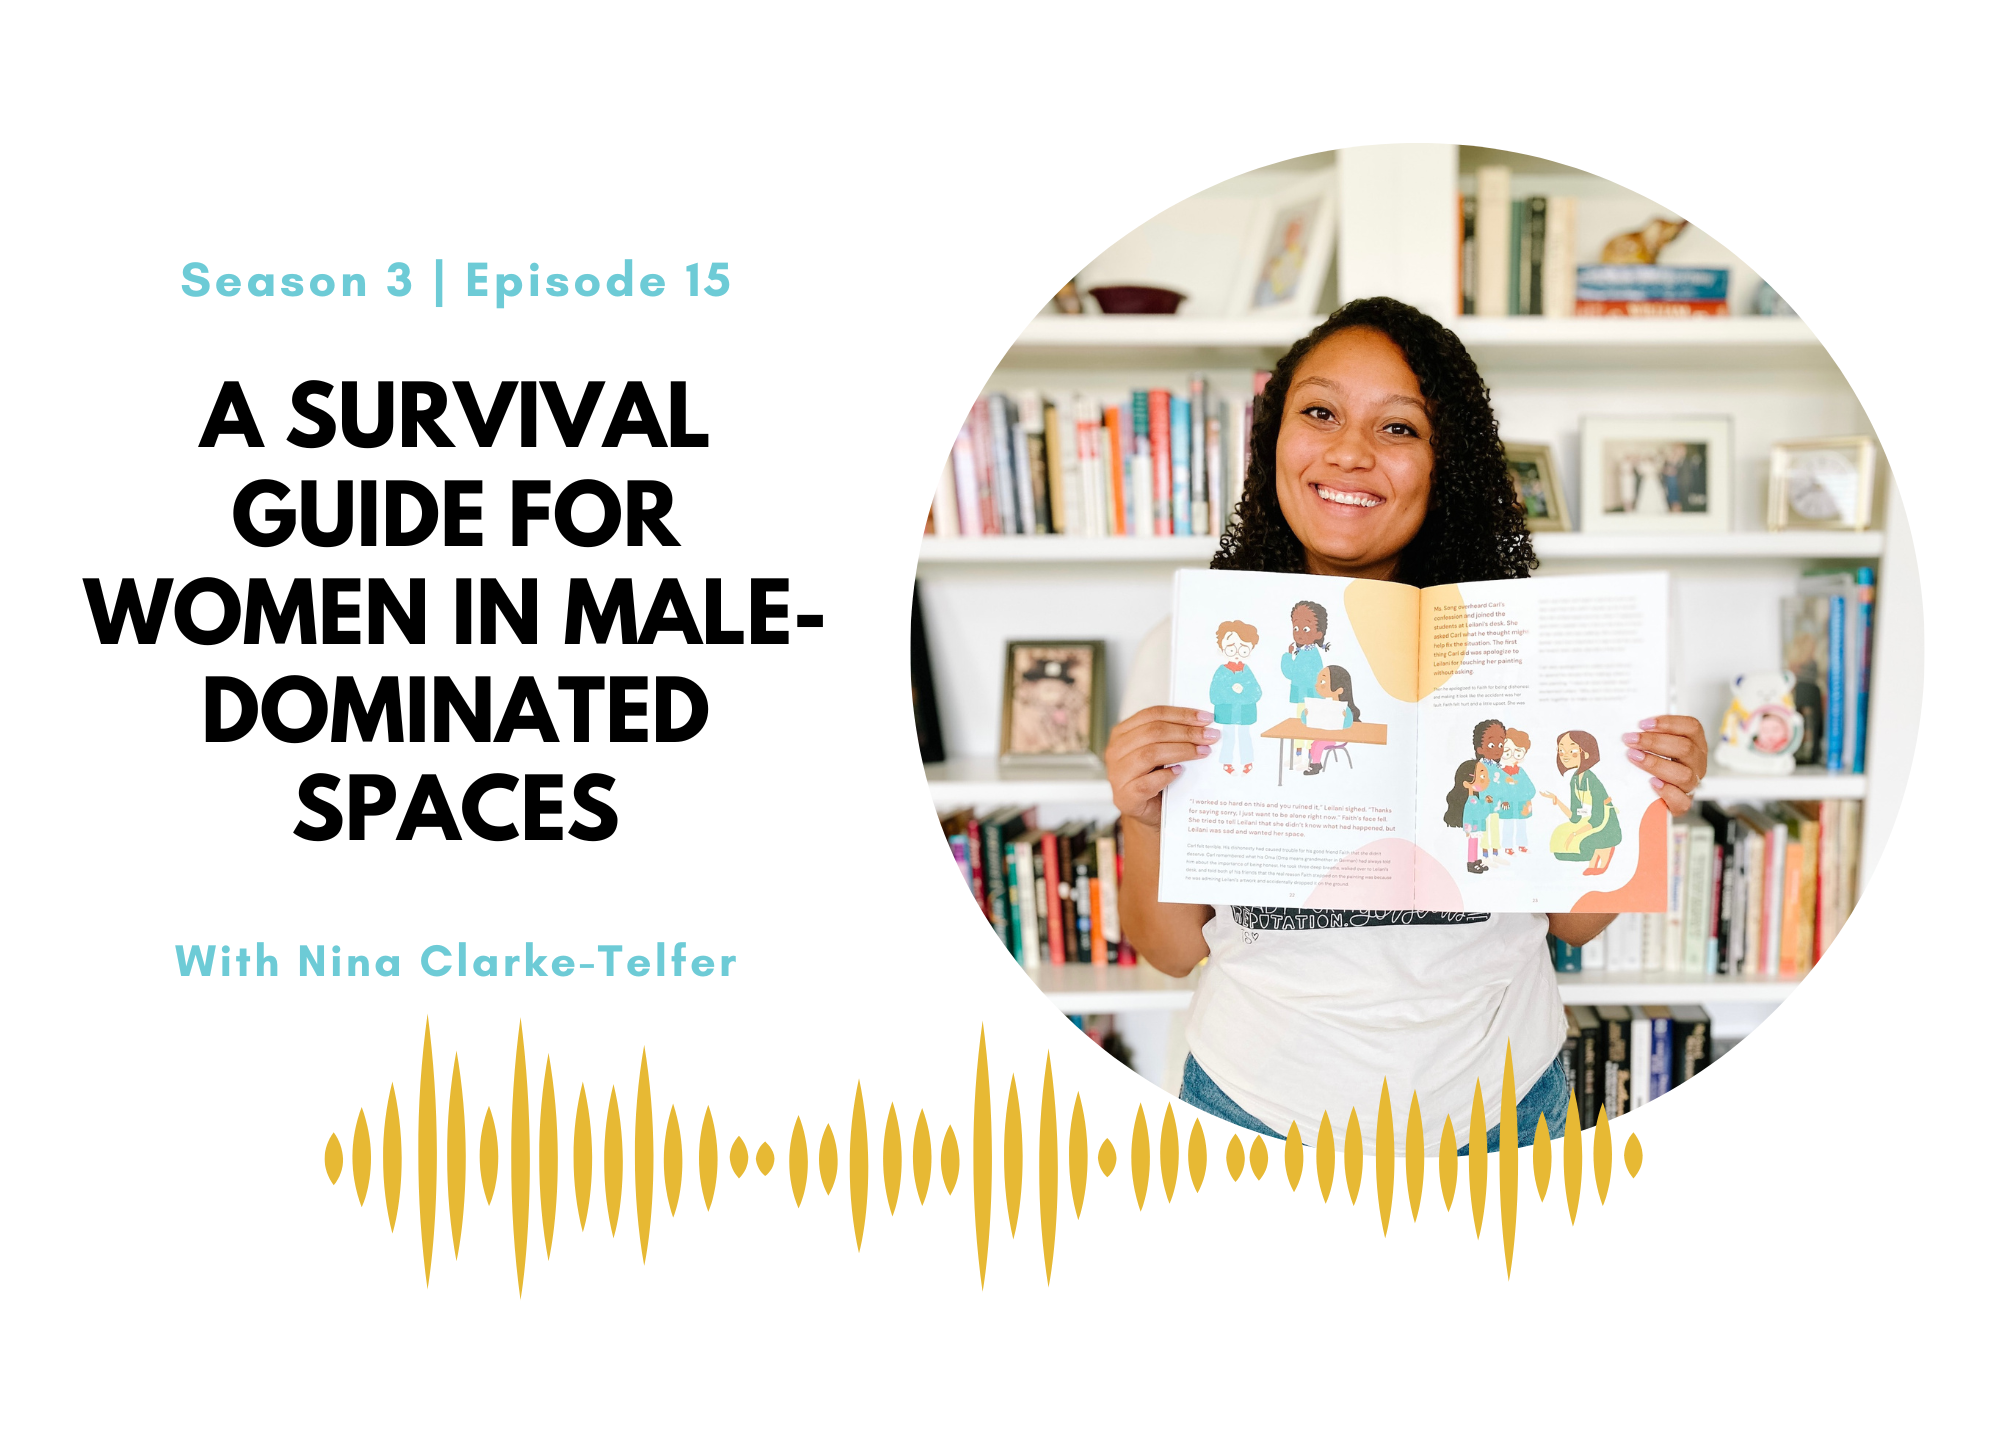 A Survival Guide for Women in Male-Dominated Spaces